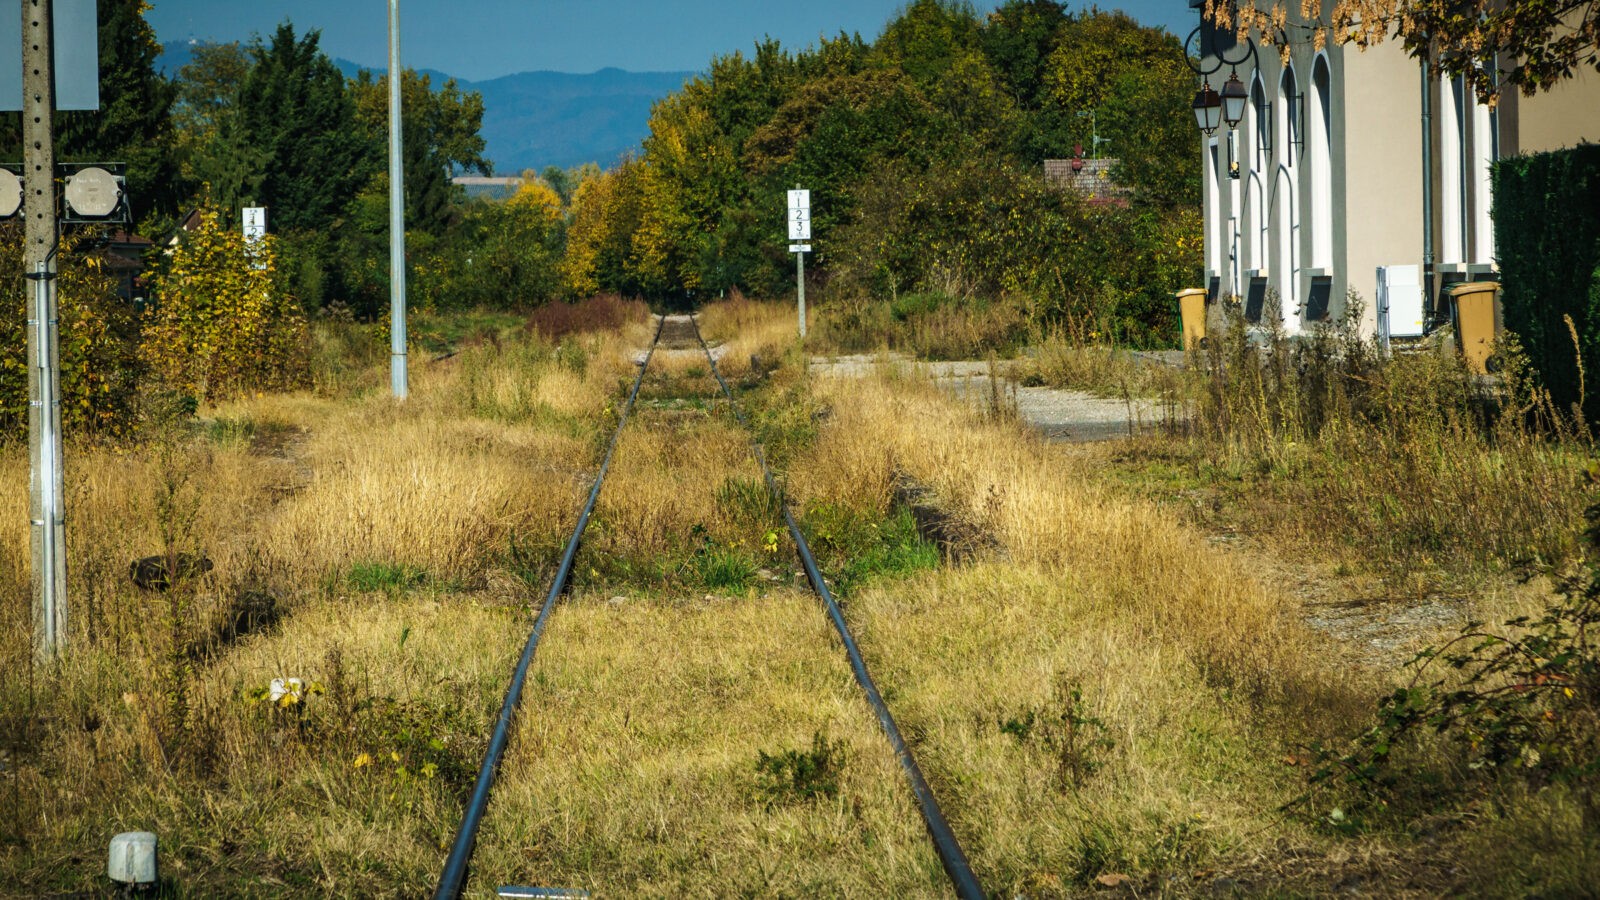 Rails To Nowhere